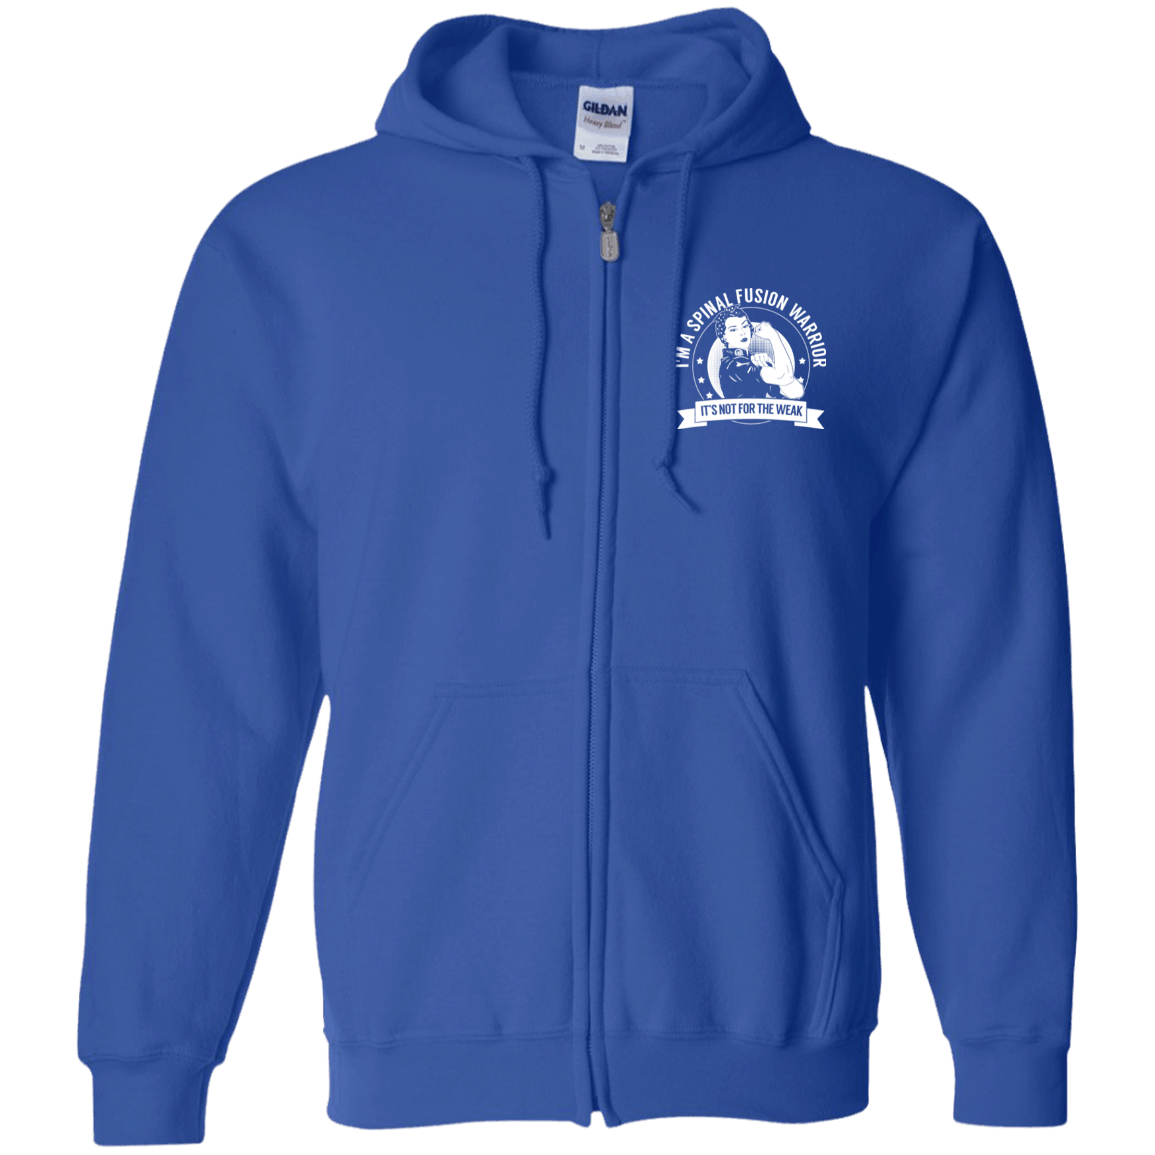 Spinal Fusion Warrior NFTW Zip Up Hooded Sweatshirt - The Unchargeables